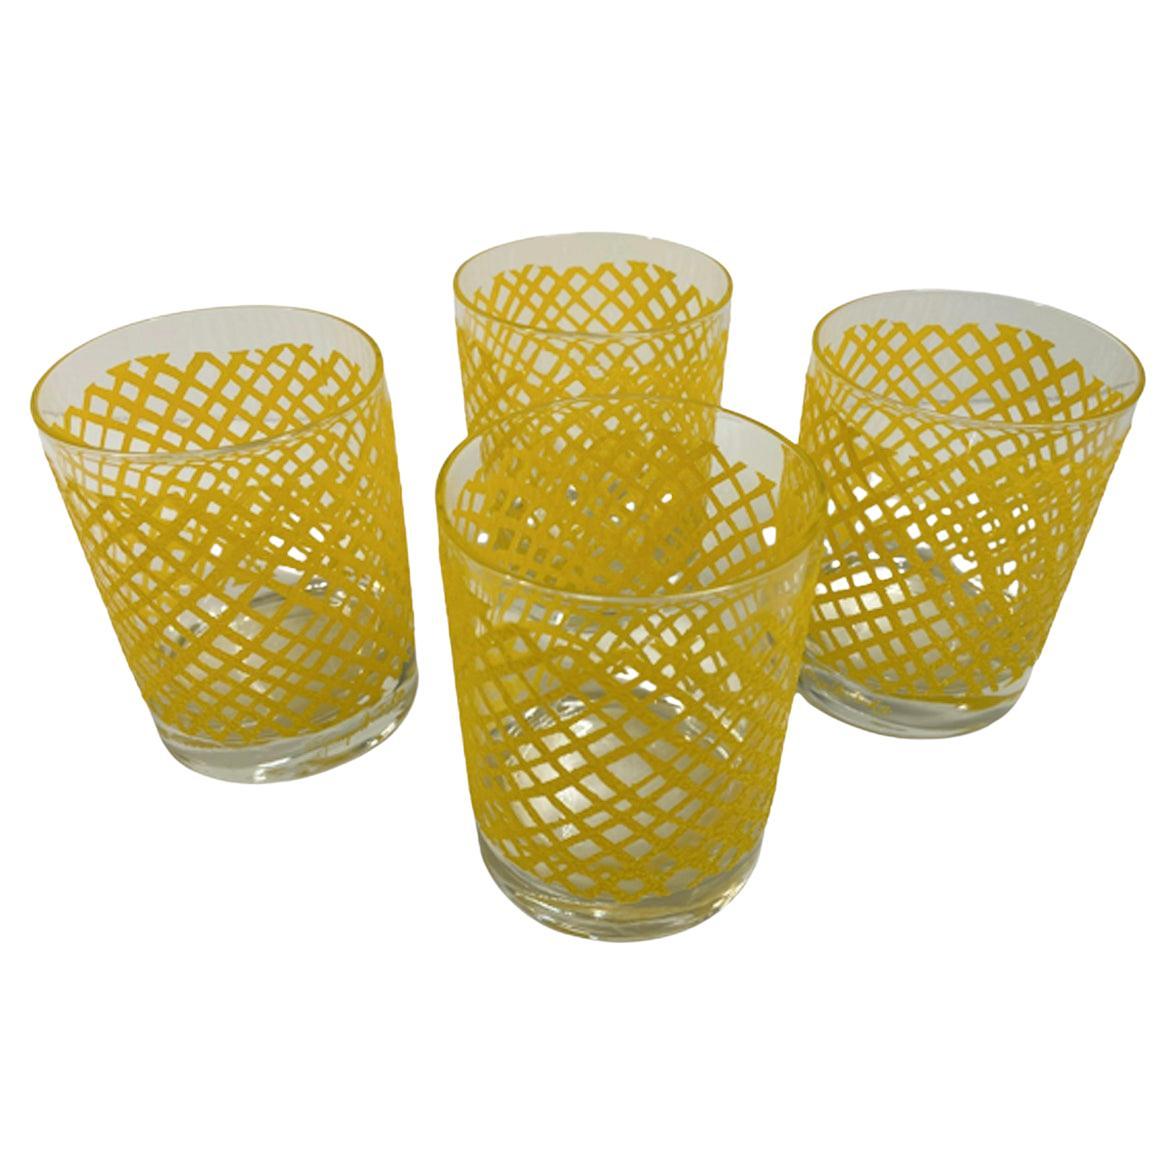 Vintage Georges Briard Rocks Glasses w/Yellow Net Non-Slip Textured Surface For Sale